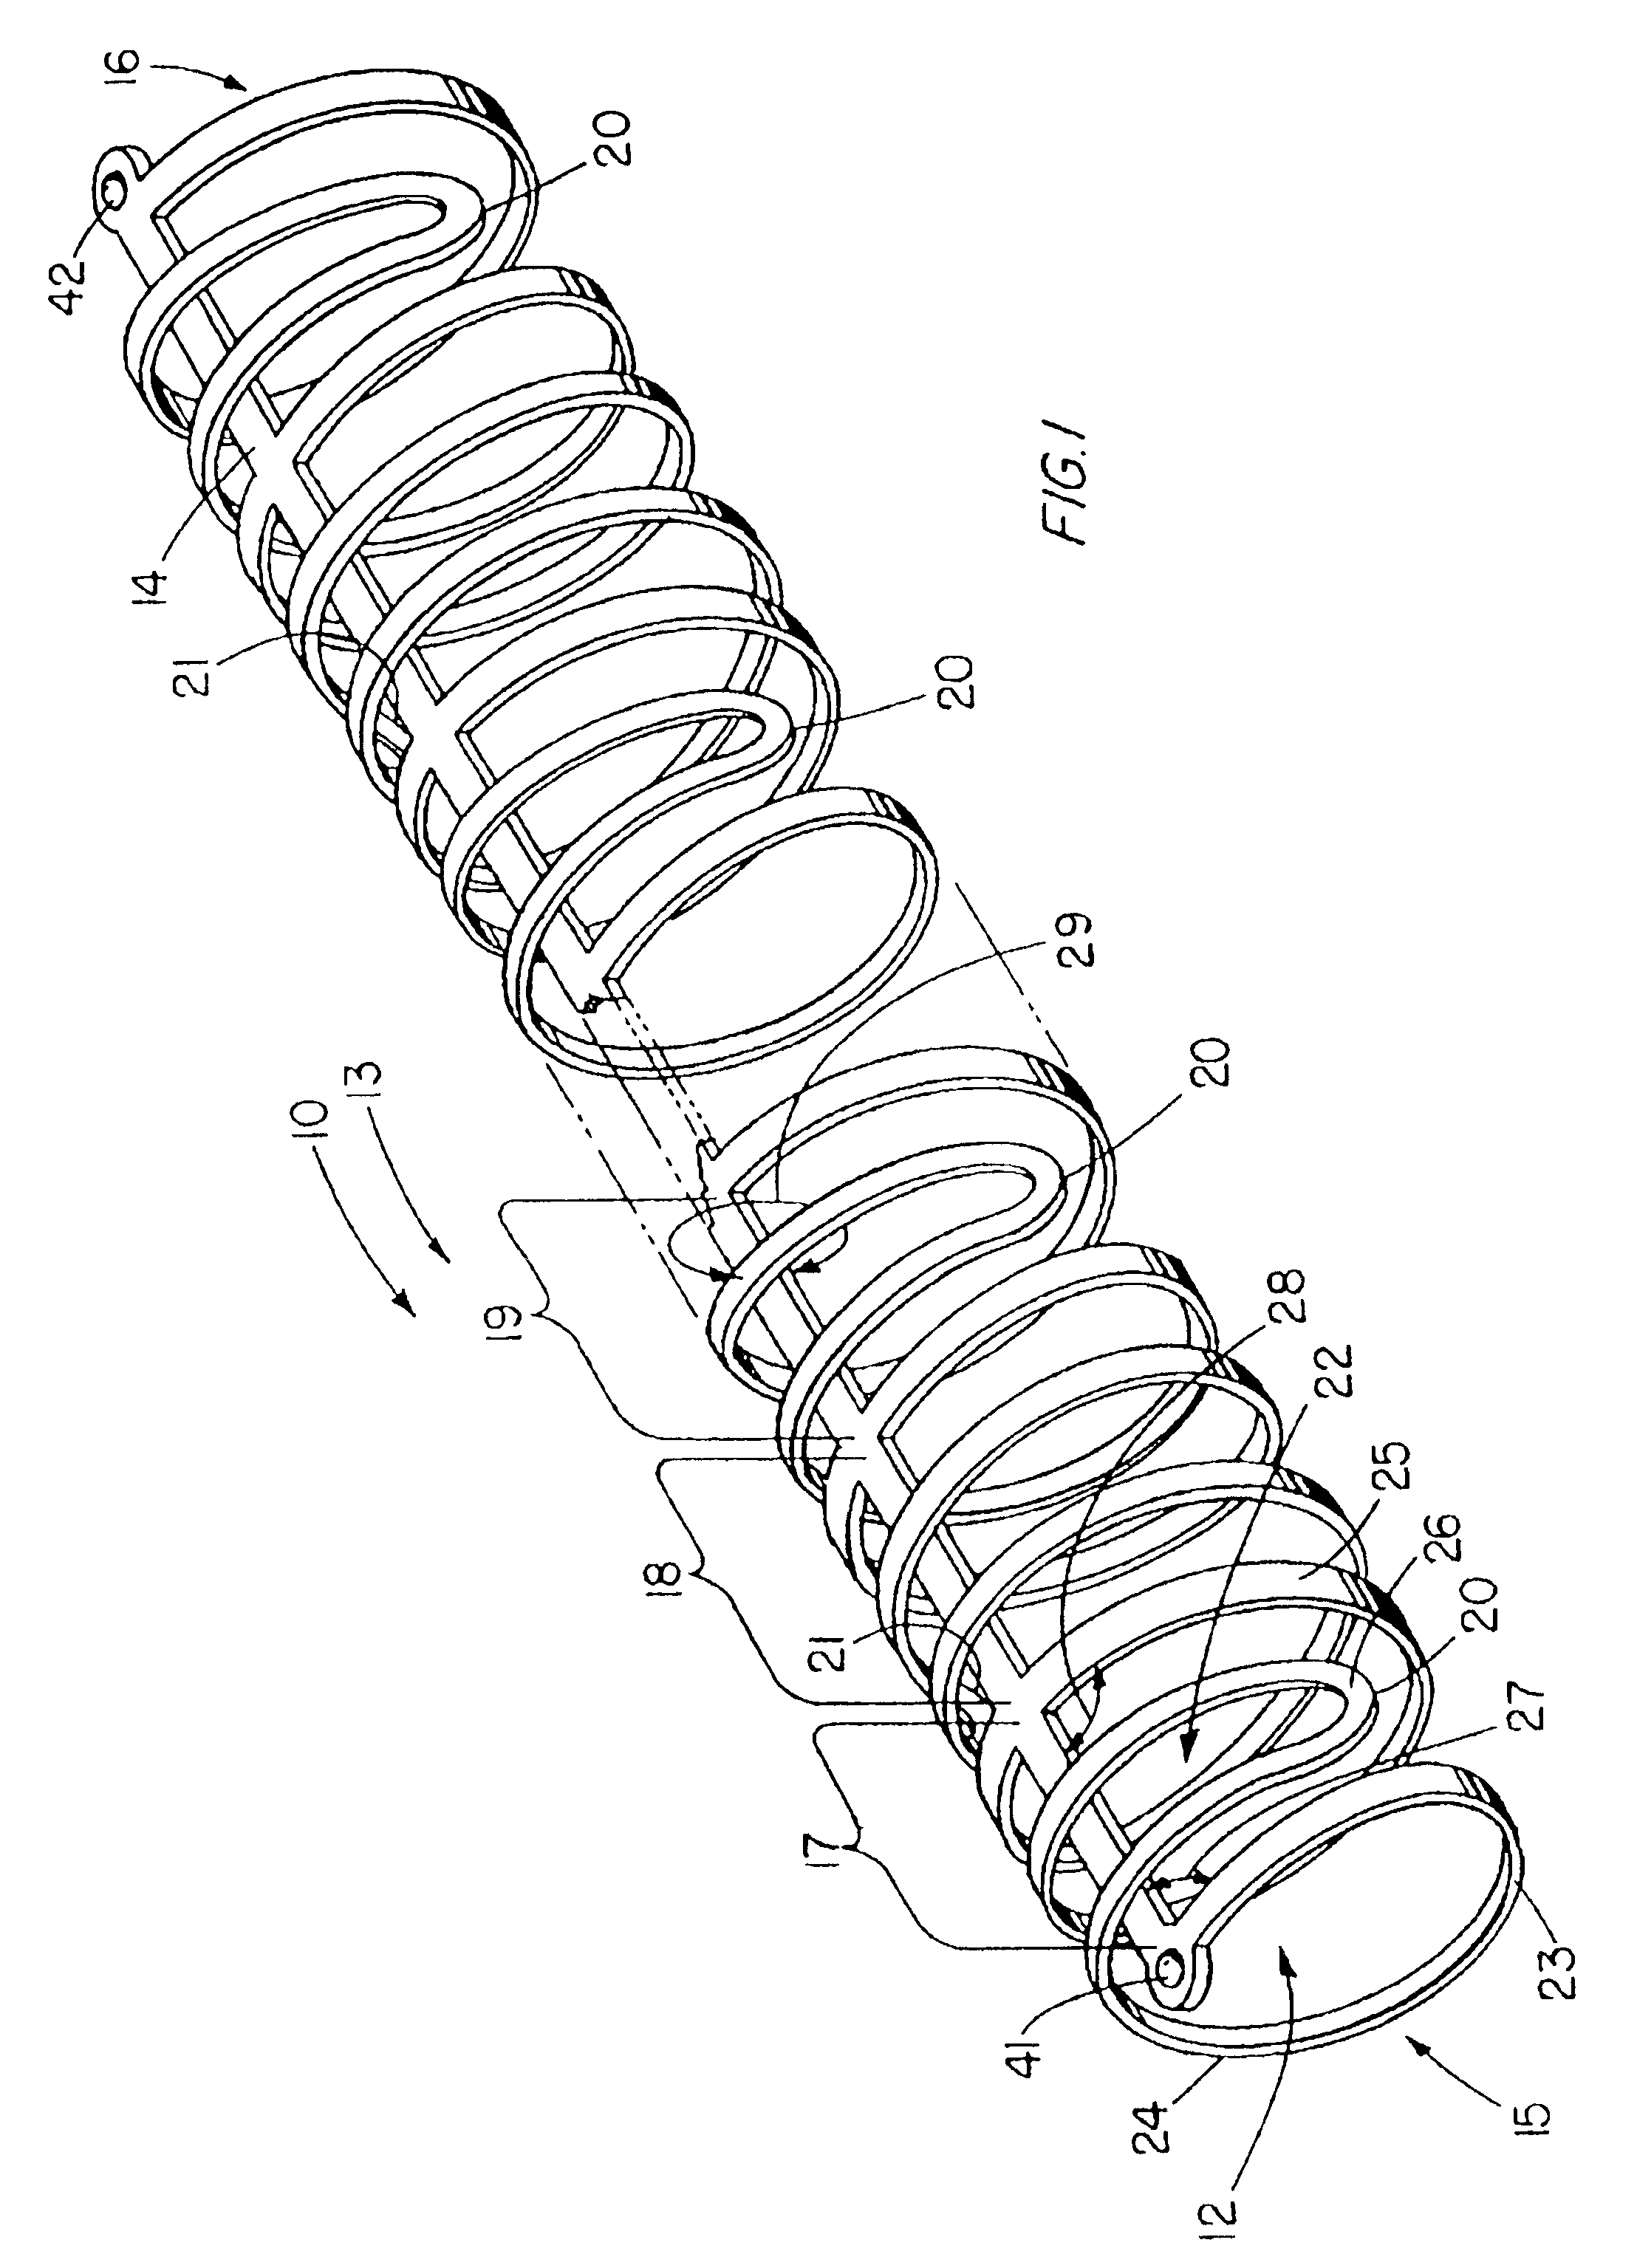 Flexible stent having a pattern formed from a sheet of material